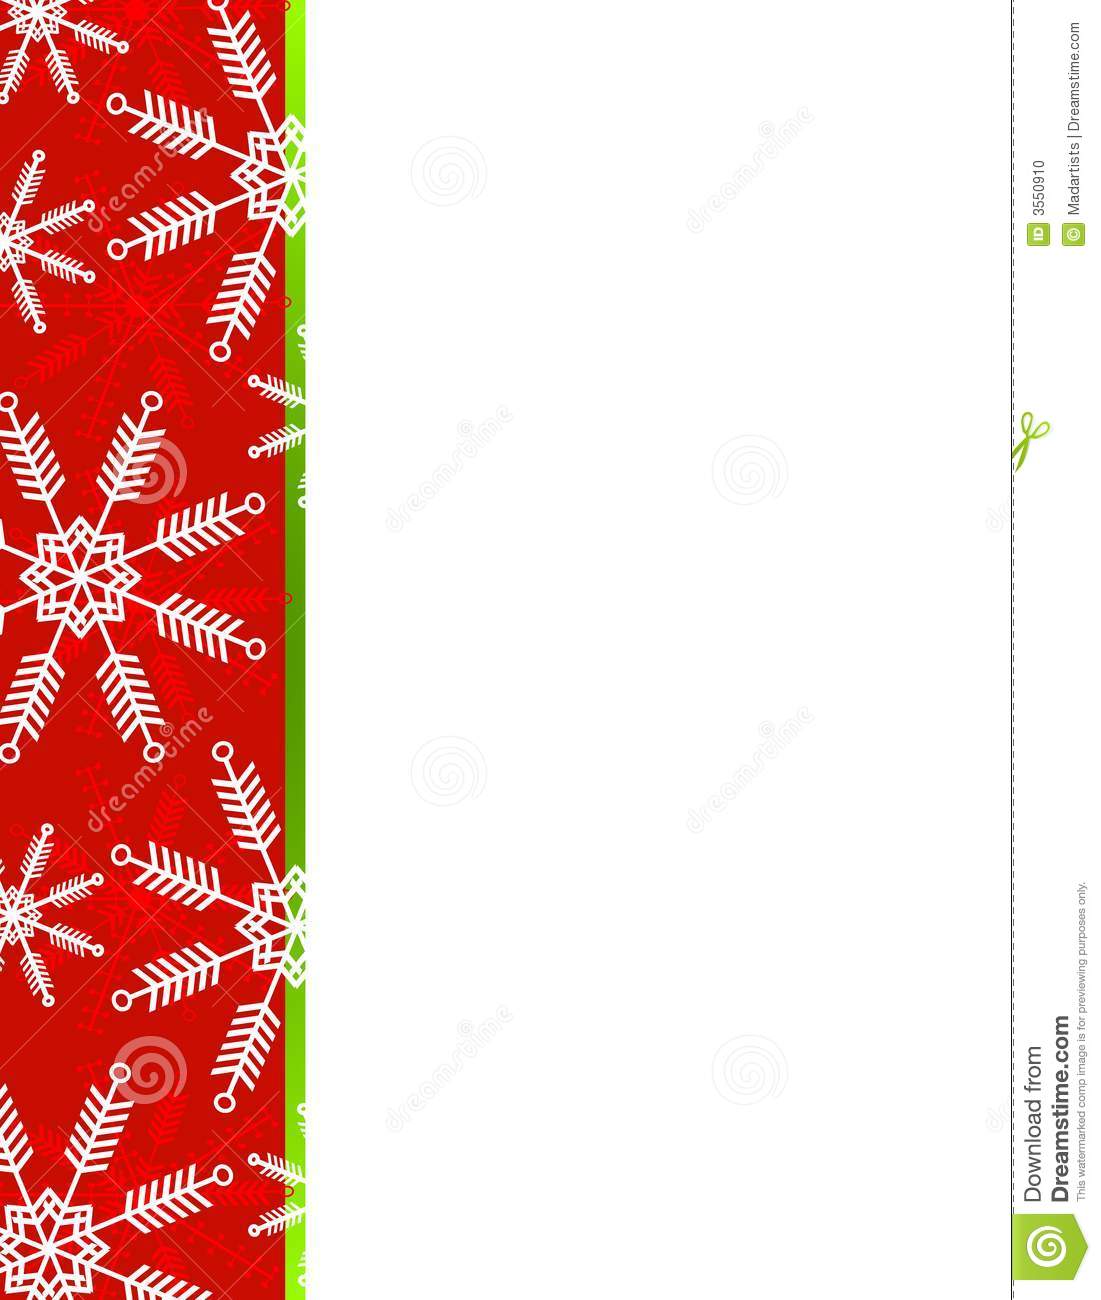 borders clipart holiday